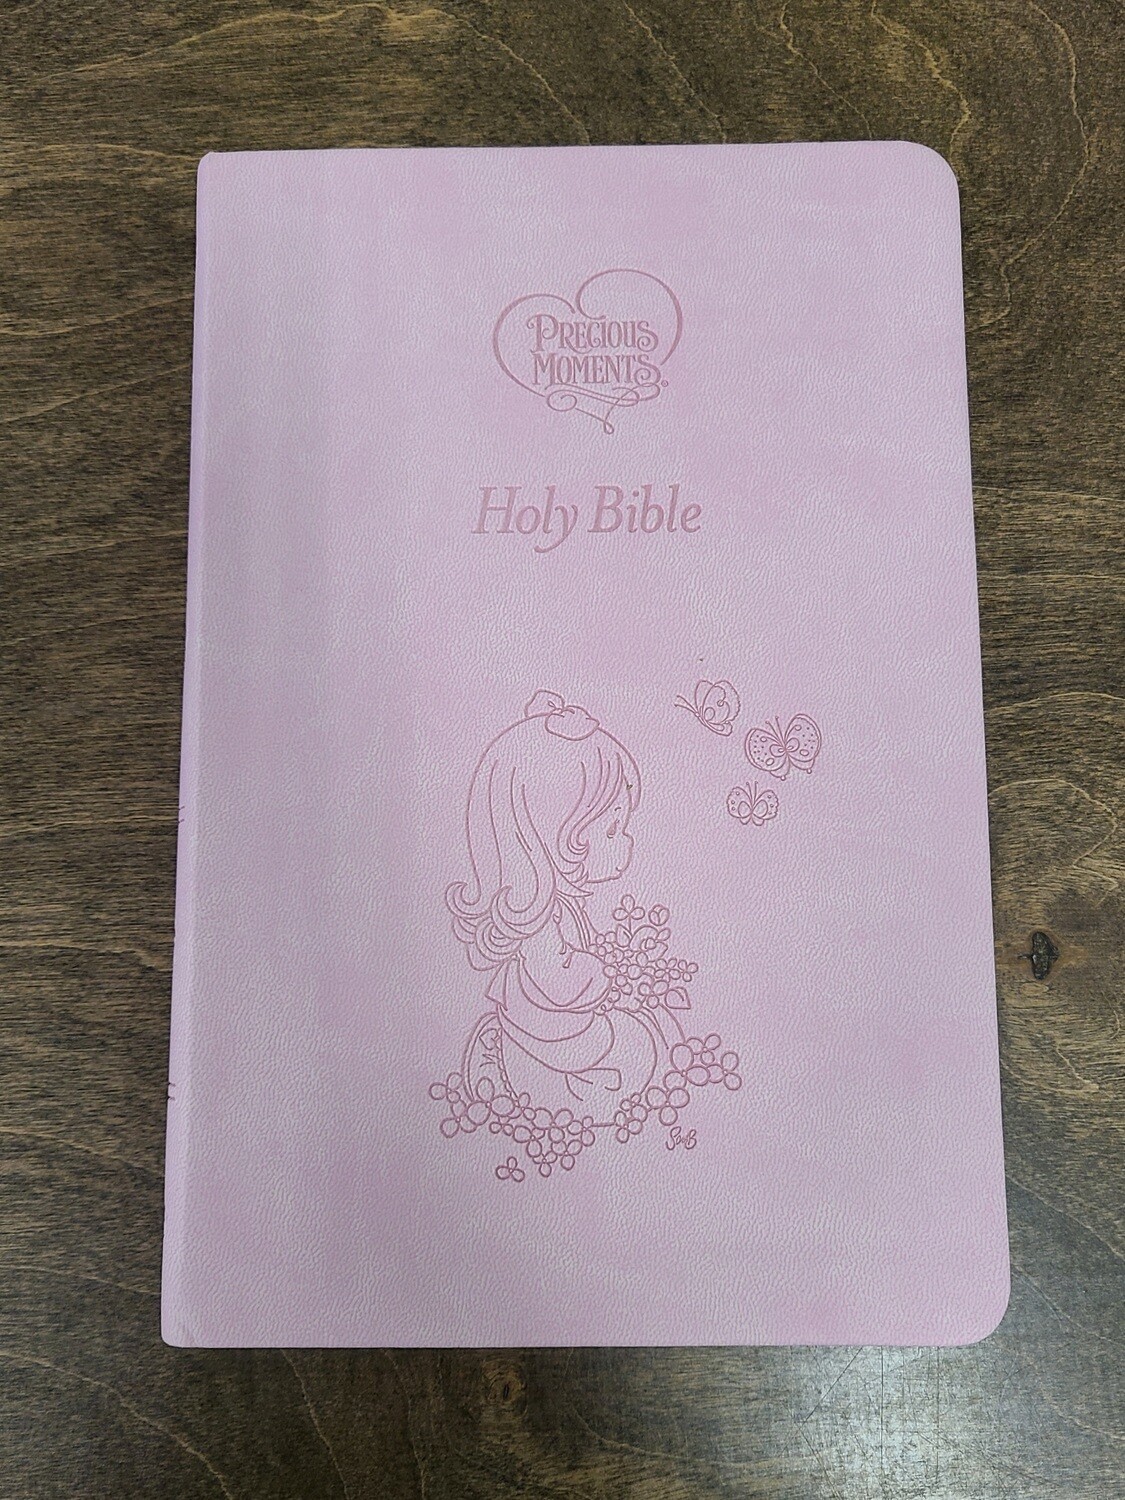 ICB Precious Moments Children's Holy Bible - Pink Leather